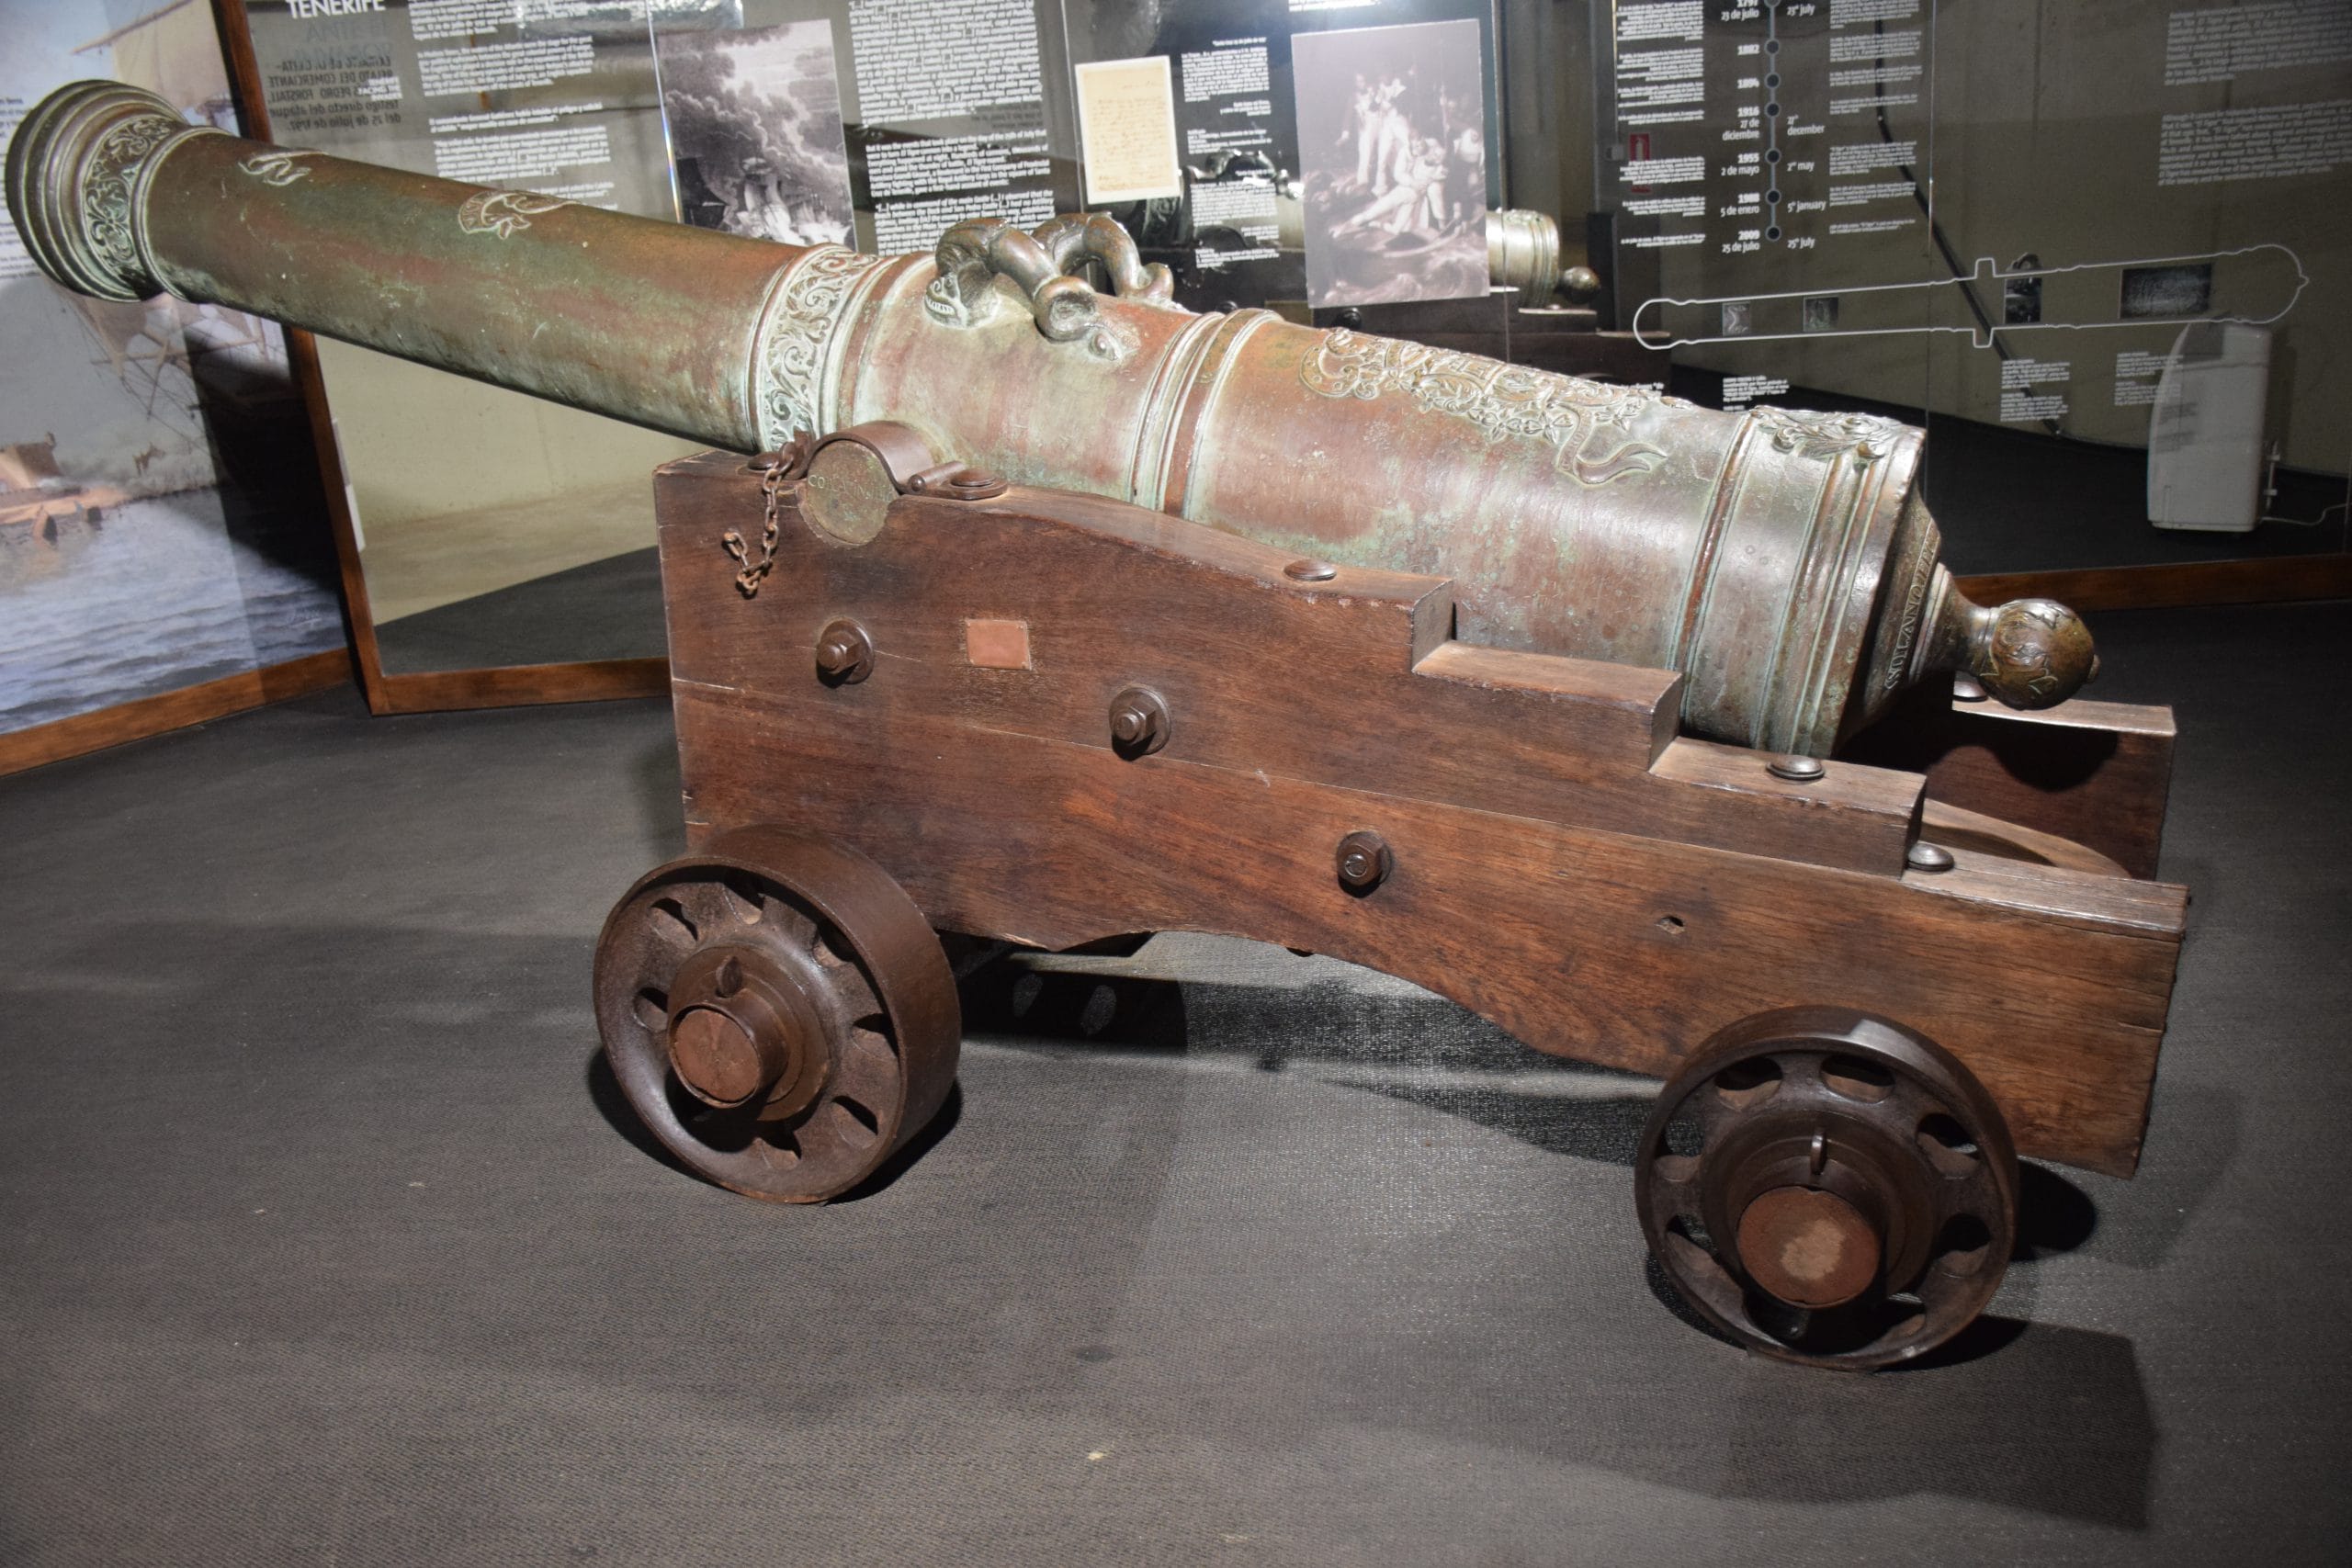 the cannon in Tenerife that shot Nelson in the arm, in a museum to the battle where the Spanish repelled the British.